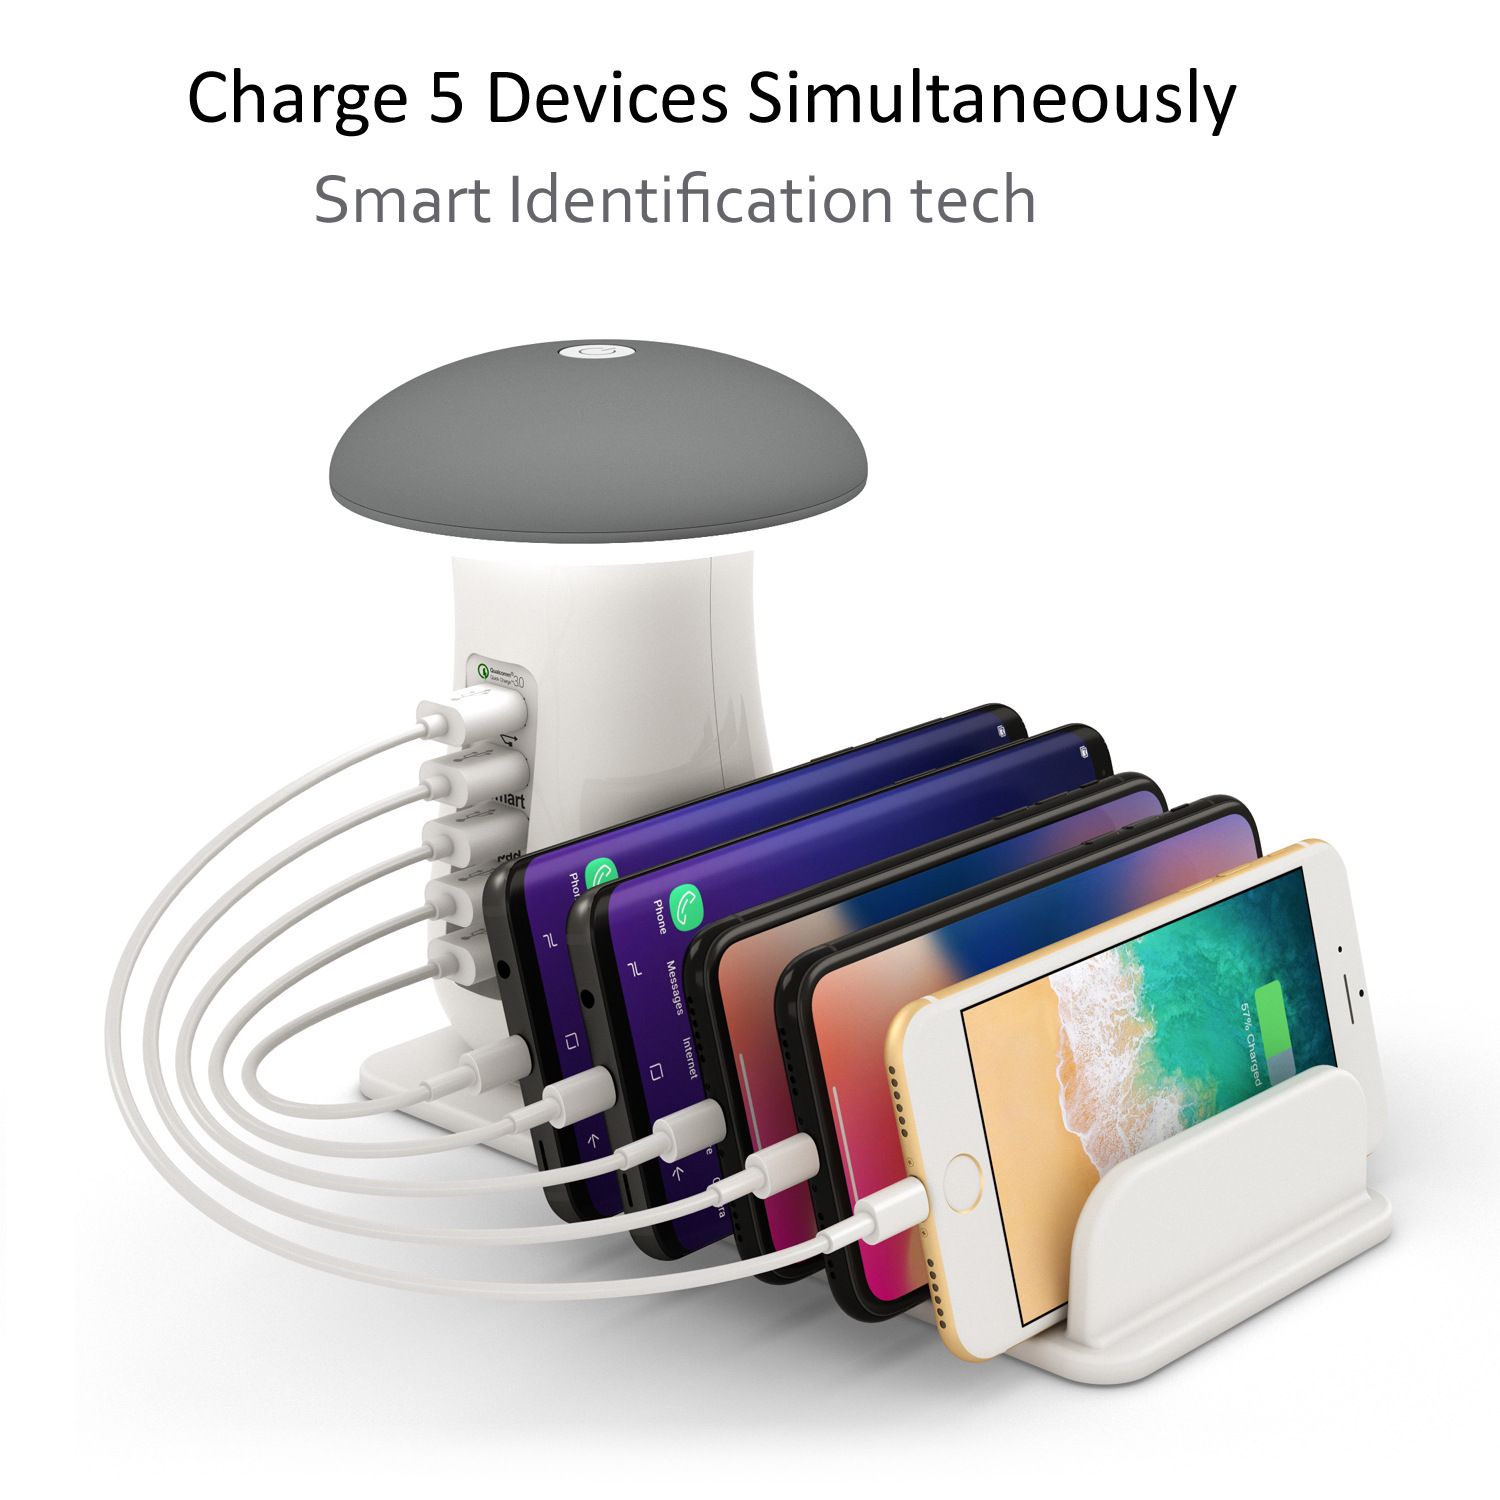 Bakeey-QC30-Multiport-Fast-Charging-USB-Charger-Mushroom-LED-Desk-Lamp-Charging-Stand-For-iPhone-XS--1568896